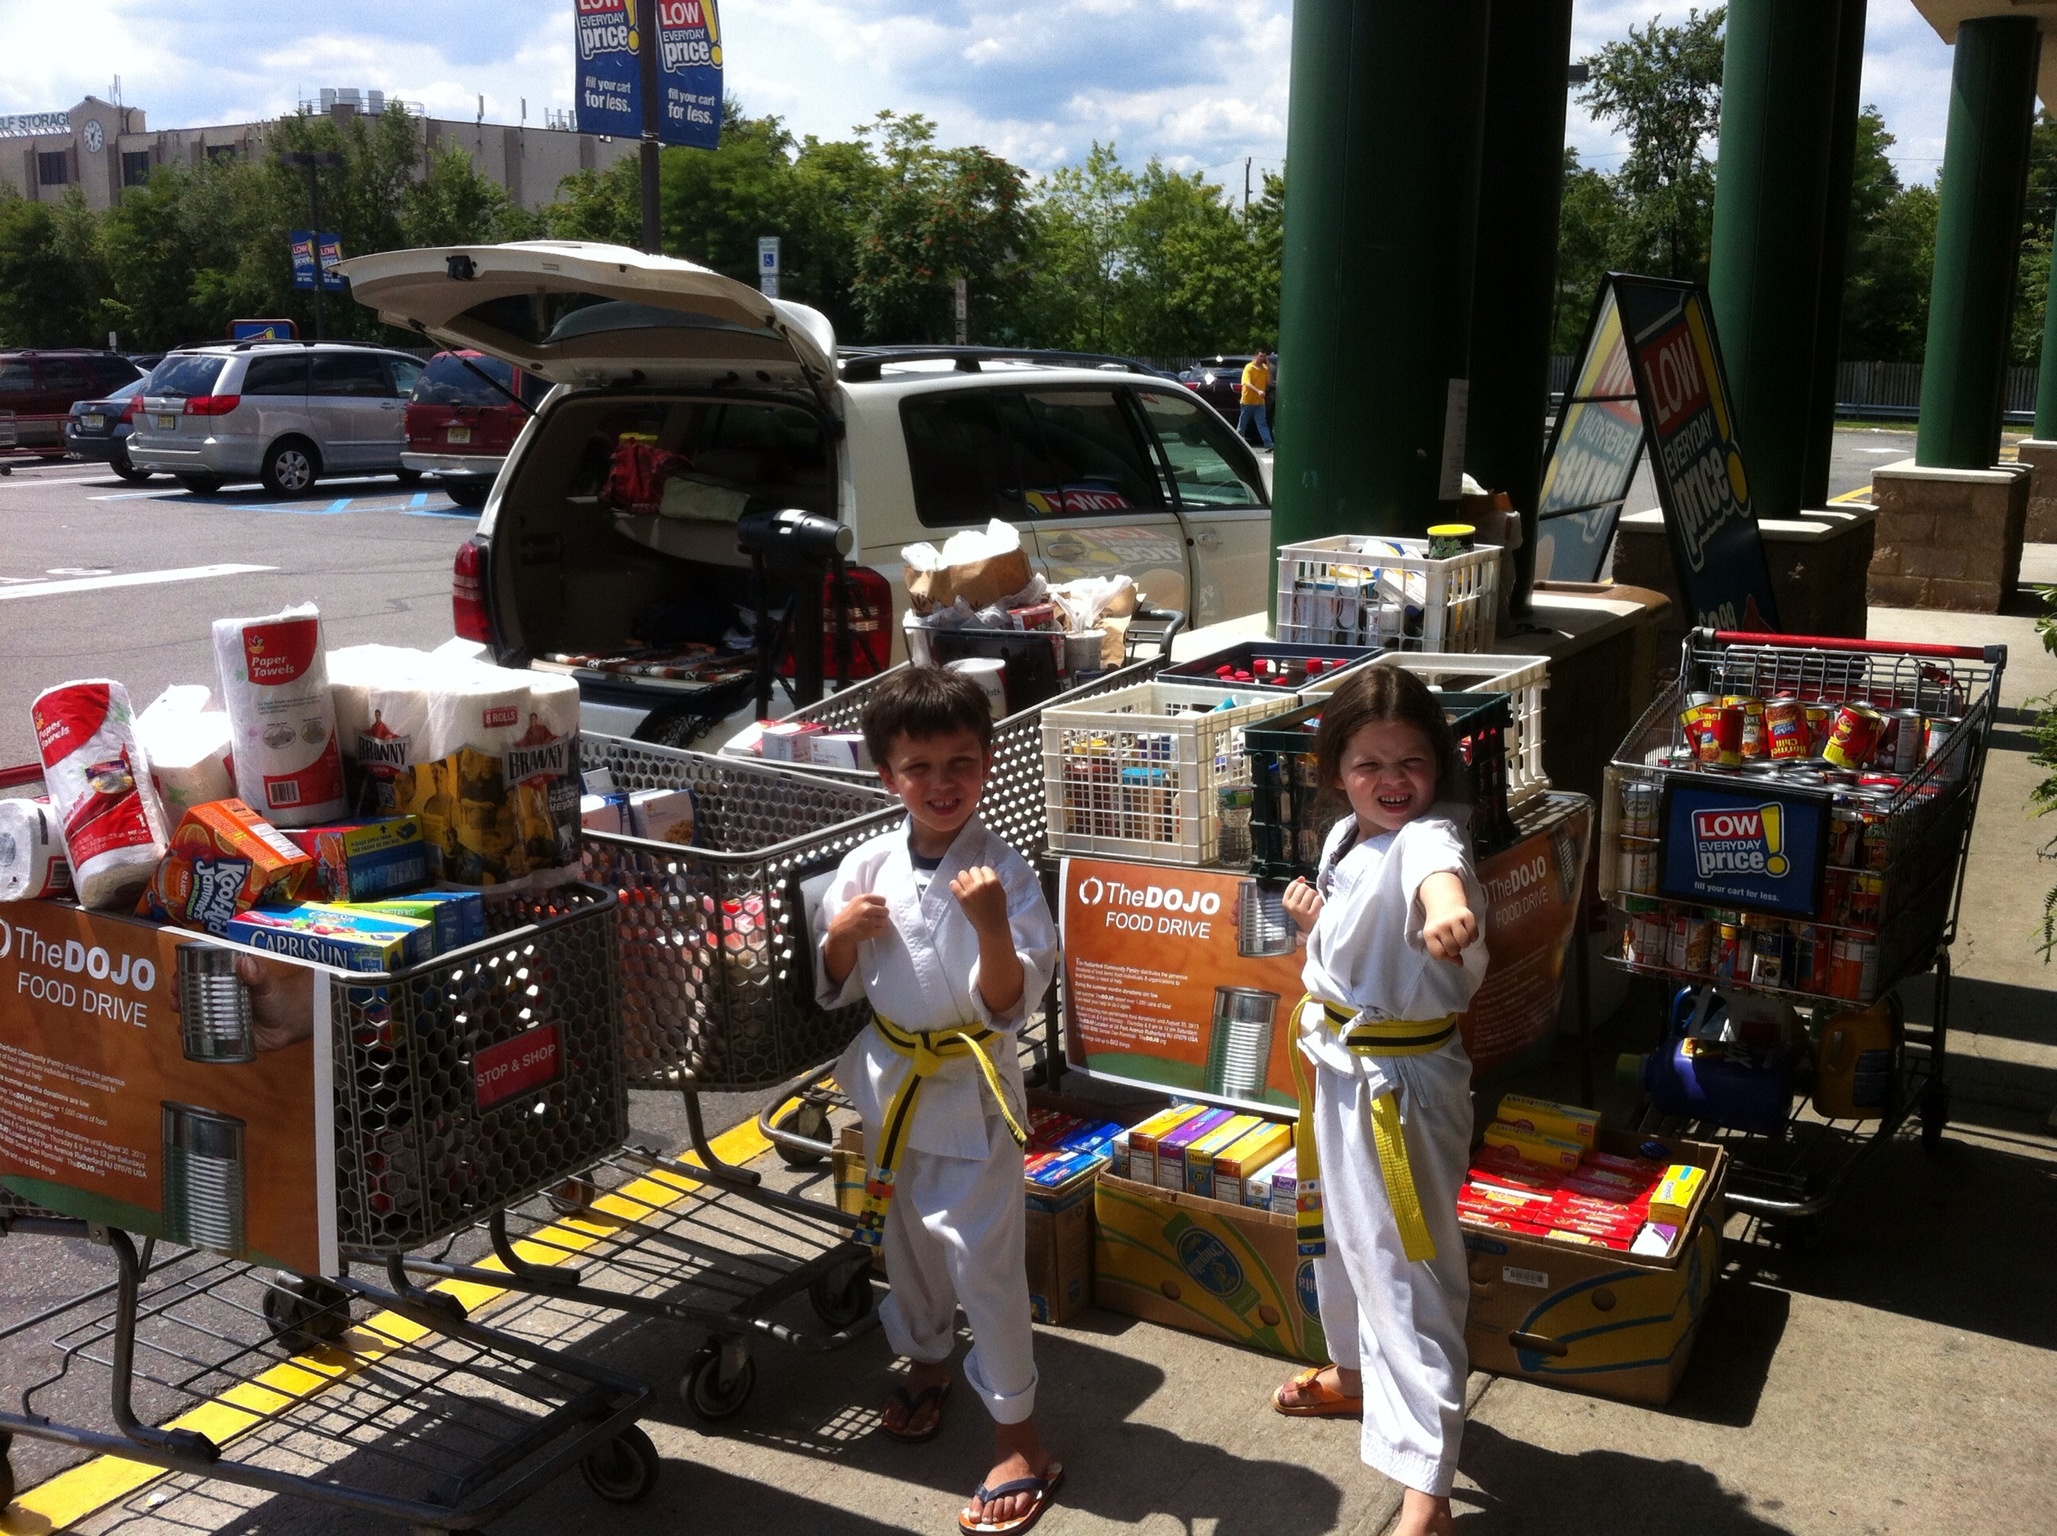 thedojo-food-drive-martial-arts-karate-kids-doing-community-service-in-rutherford-nj_14668864904_o.jpg